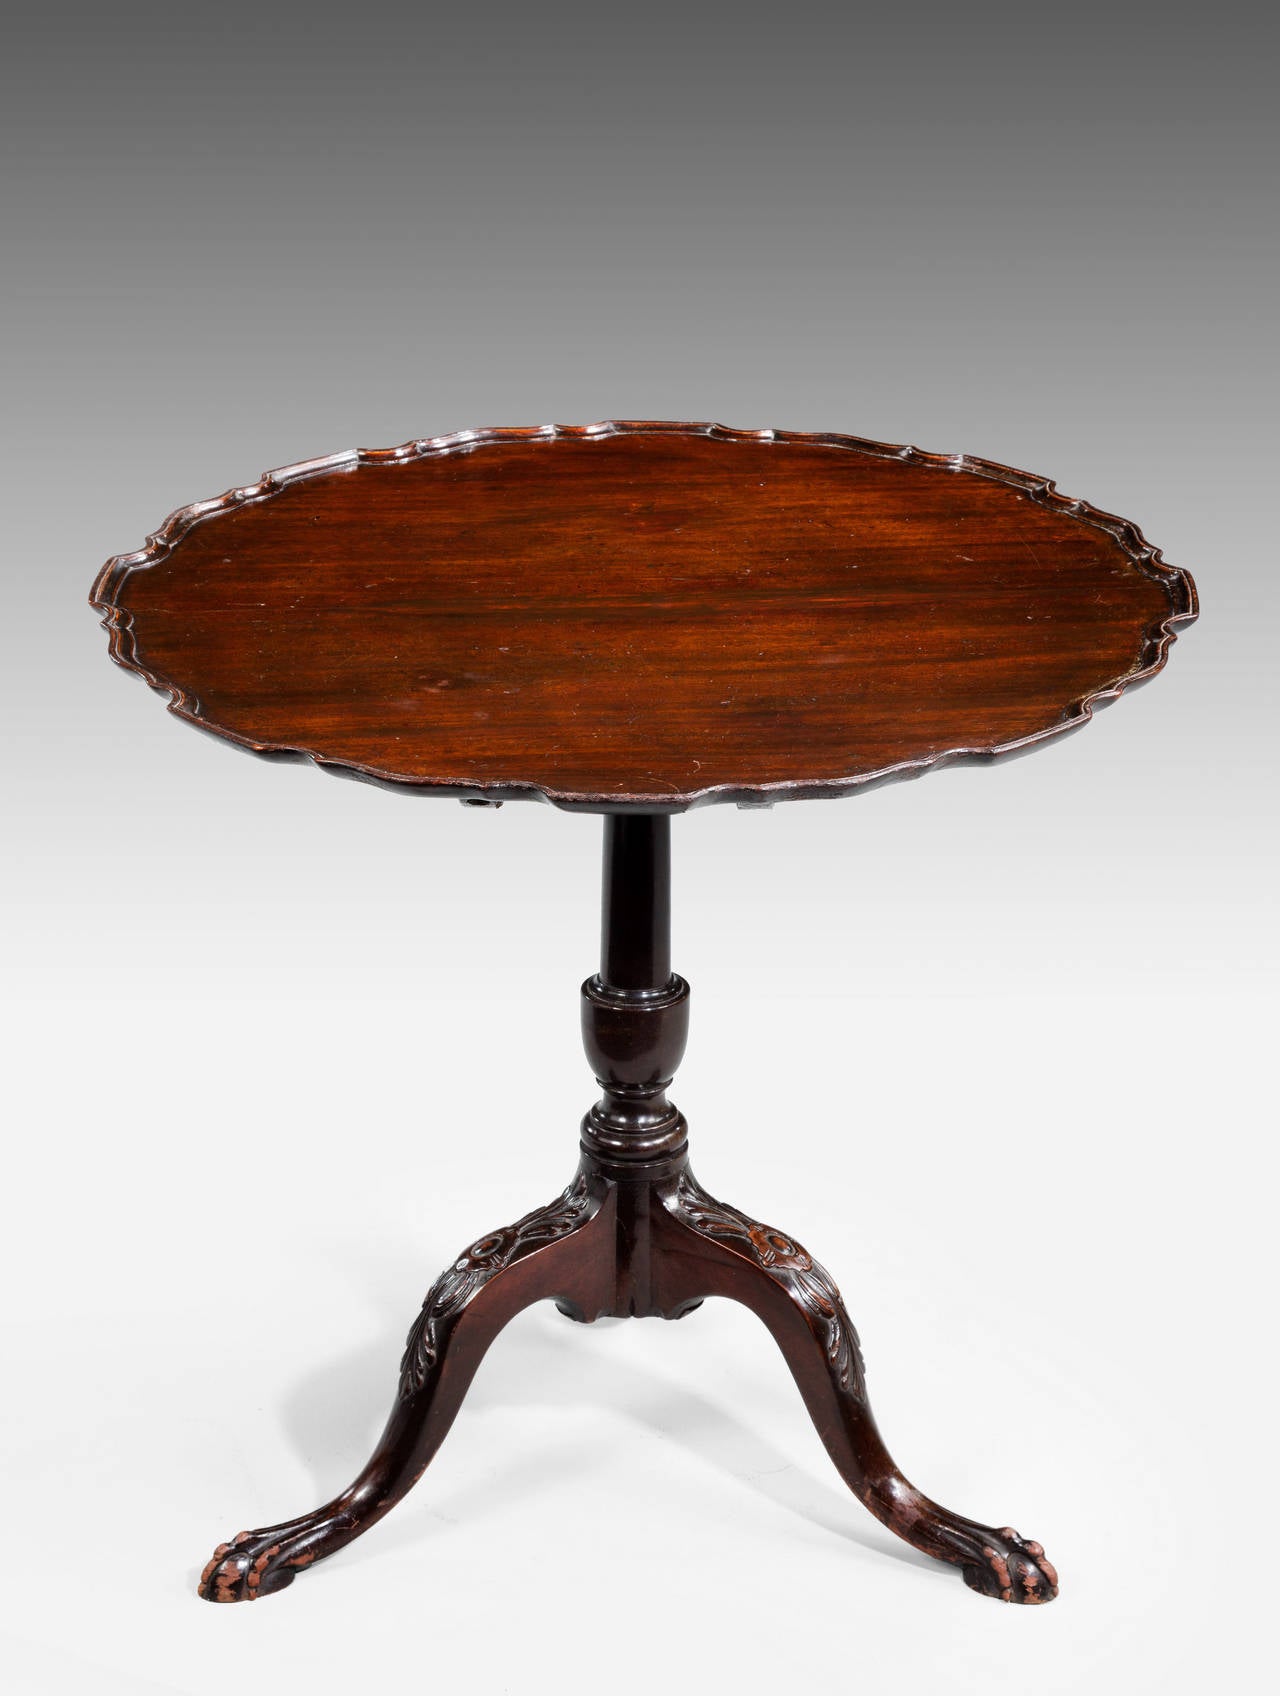 A Chippendale style mahogany dish-top tilt table. The wavy top over well carved supports.

RR.